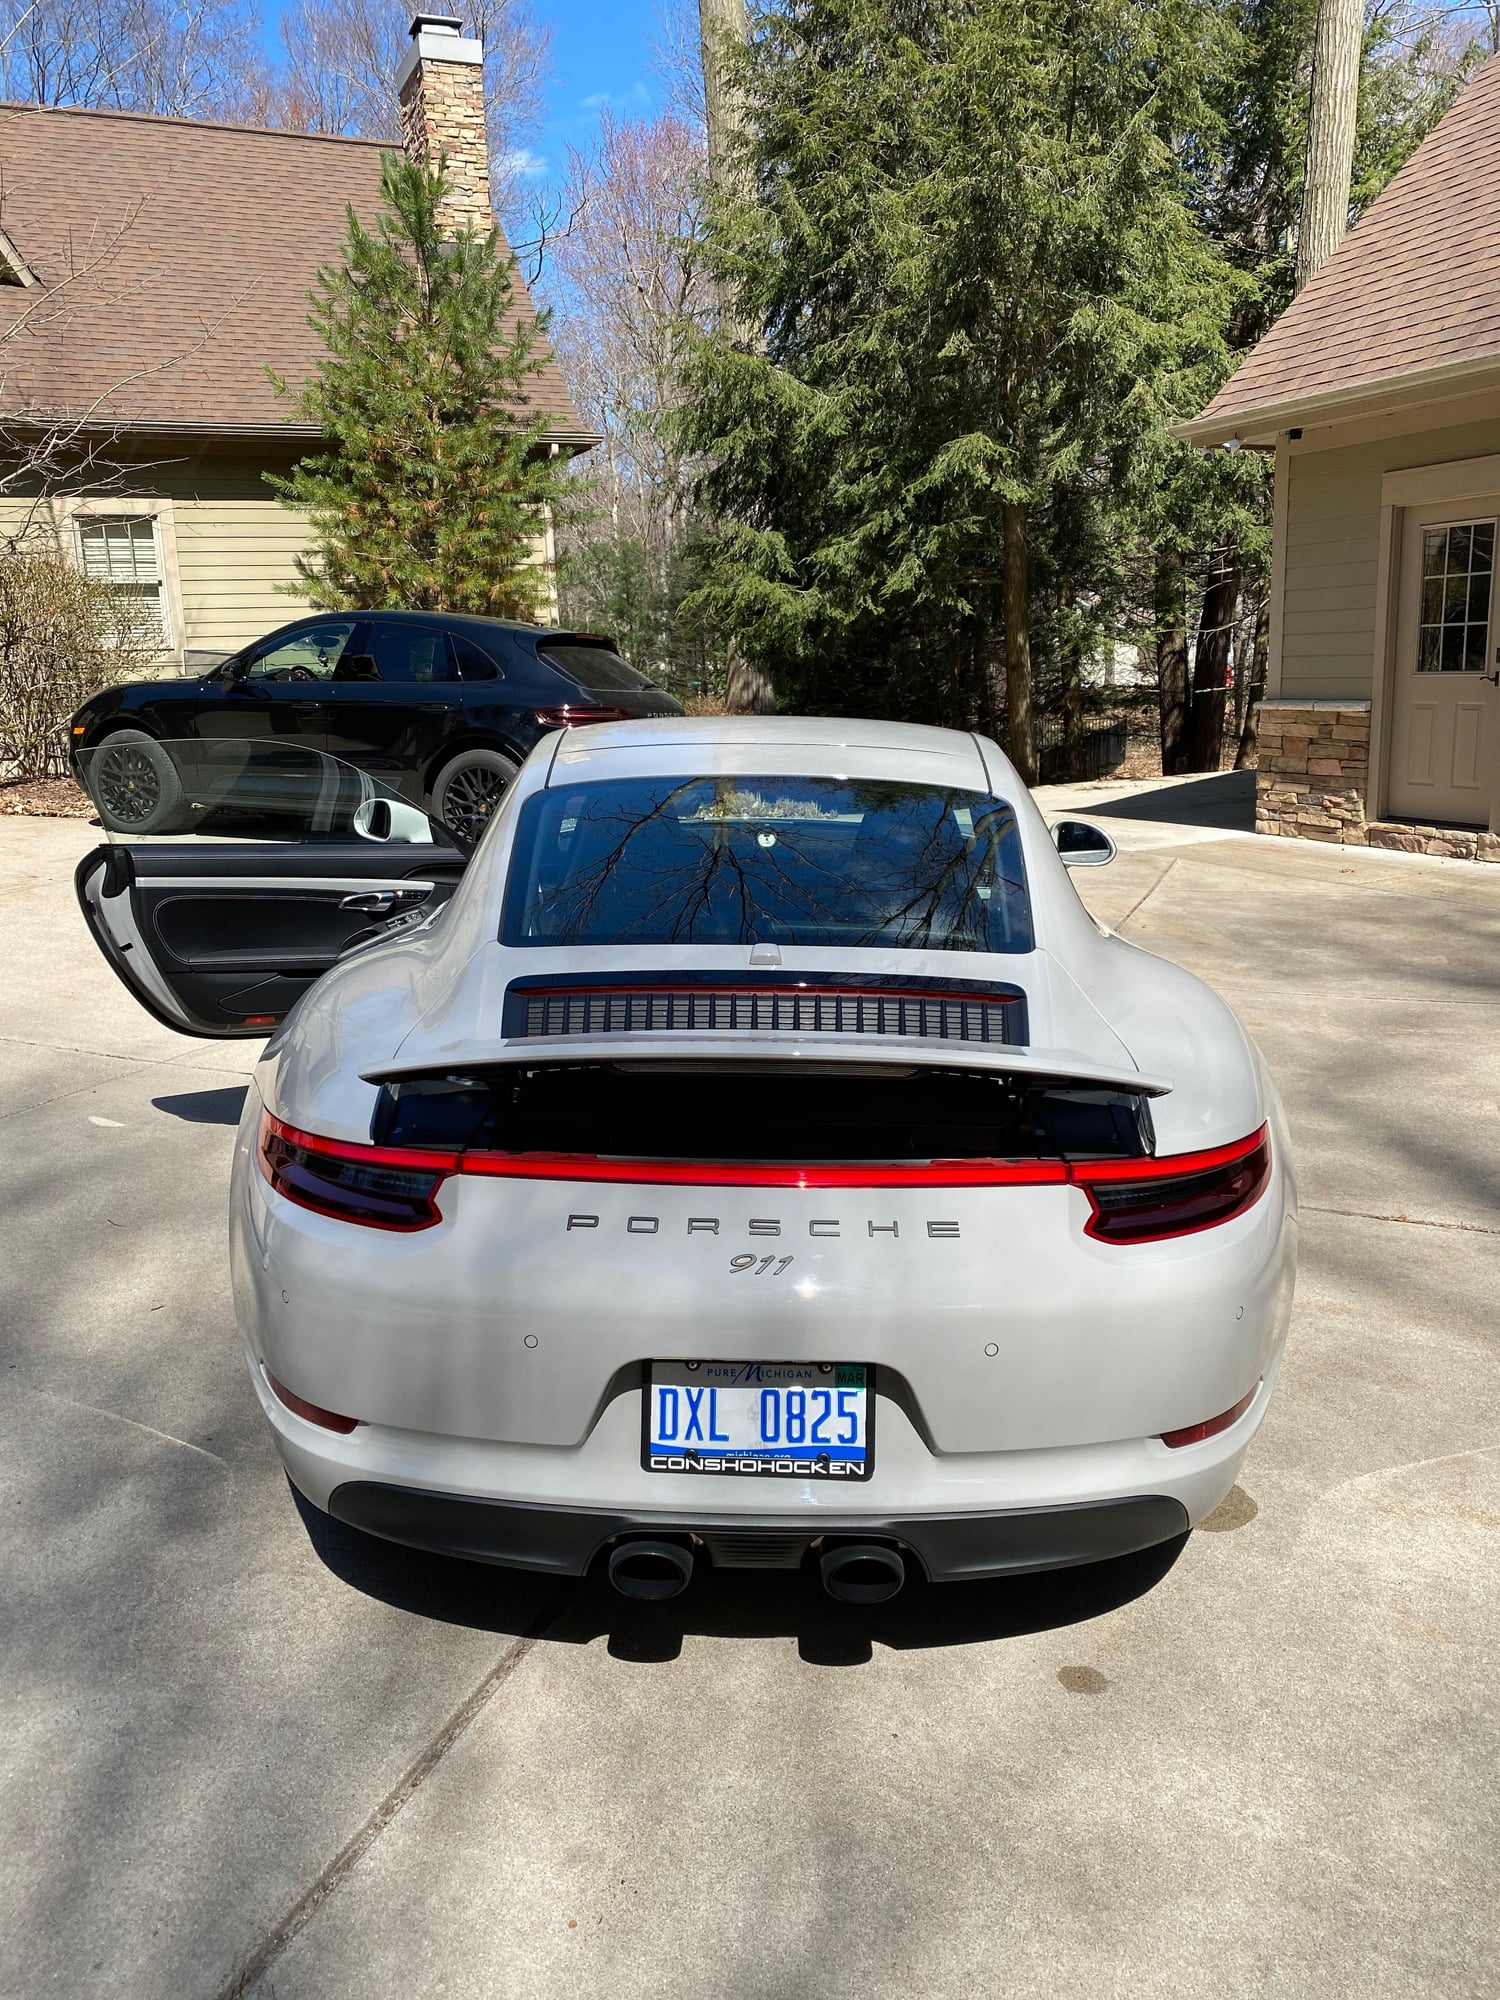 2019 Porsche 911 - 2019 Porsche 911 4GTS for sale - Used - VIN WP0AB2A92KS115004 - 7,500 Miles - 6 cyl - 4WD - Automatic - Coupe - Gray - Spring Lake, MI 49456, United States